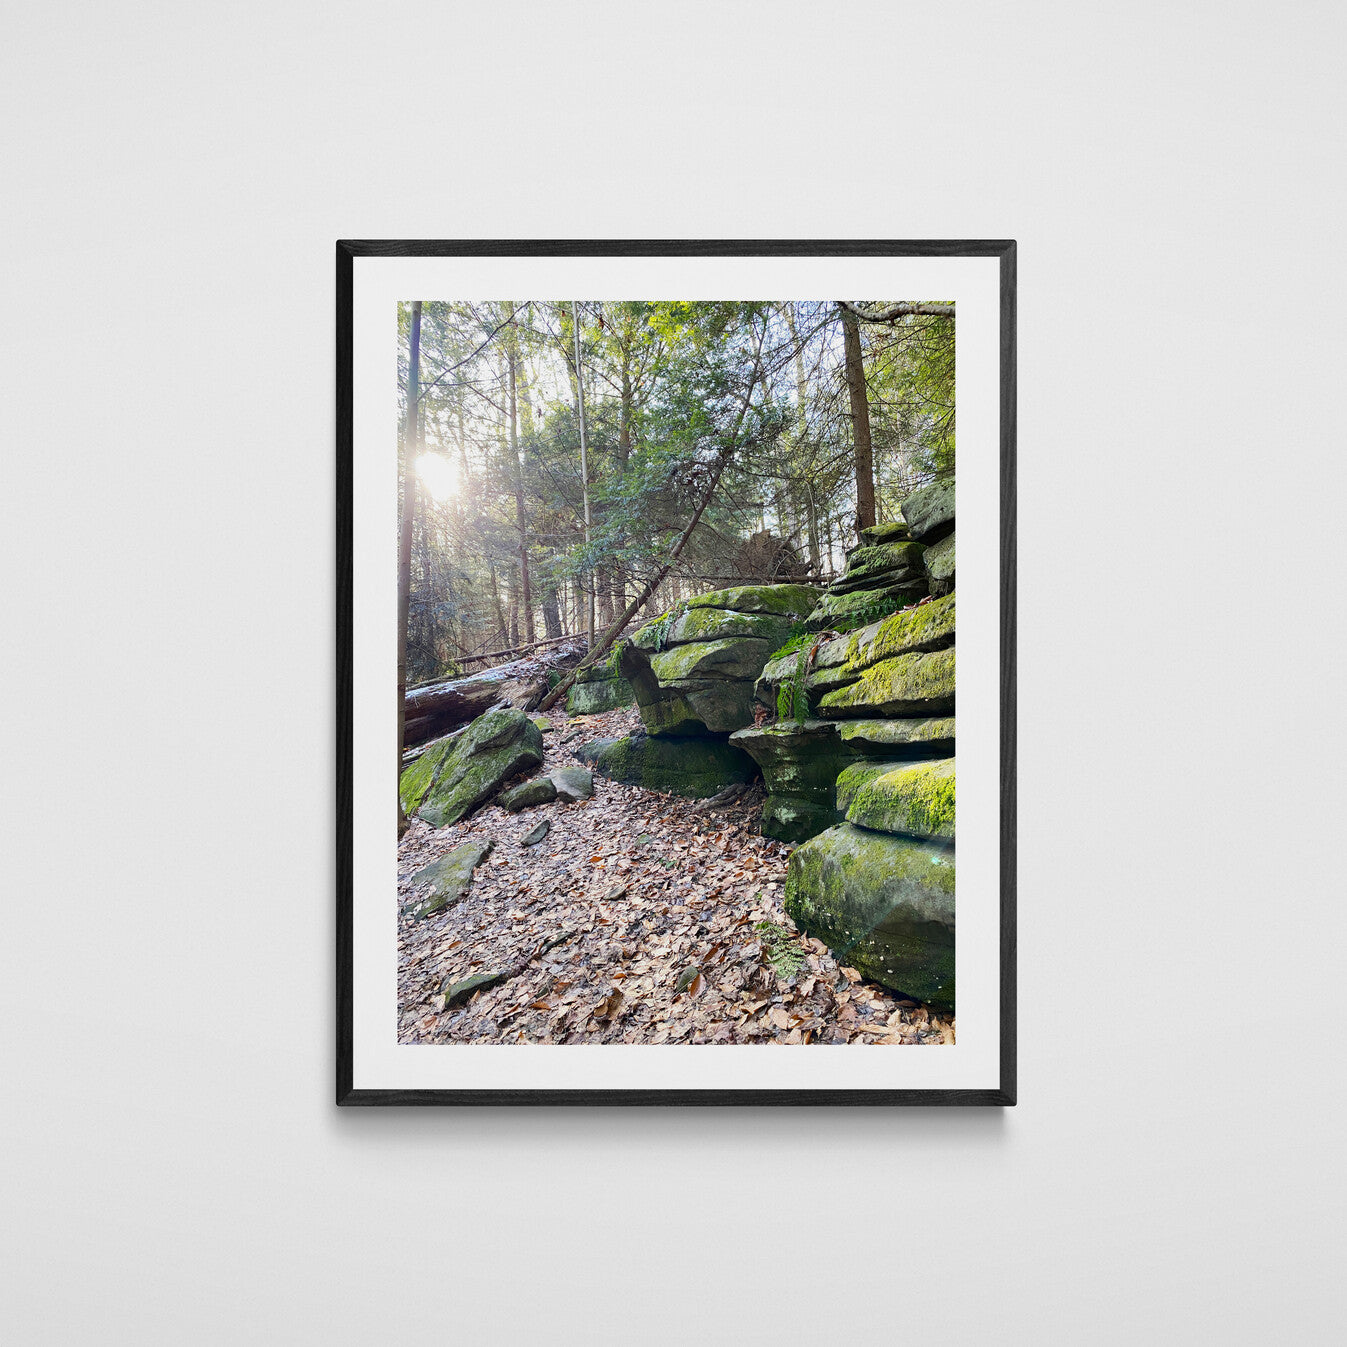 Sunbeam at Kendall Ledges, Cuyahoga Valley Nature Photography, Ohio Nature Wall Art